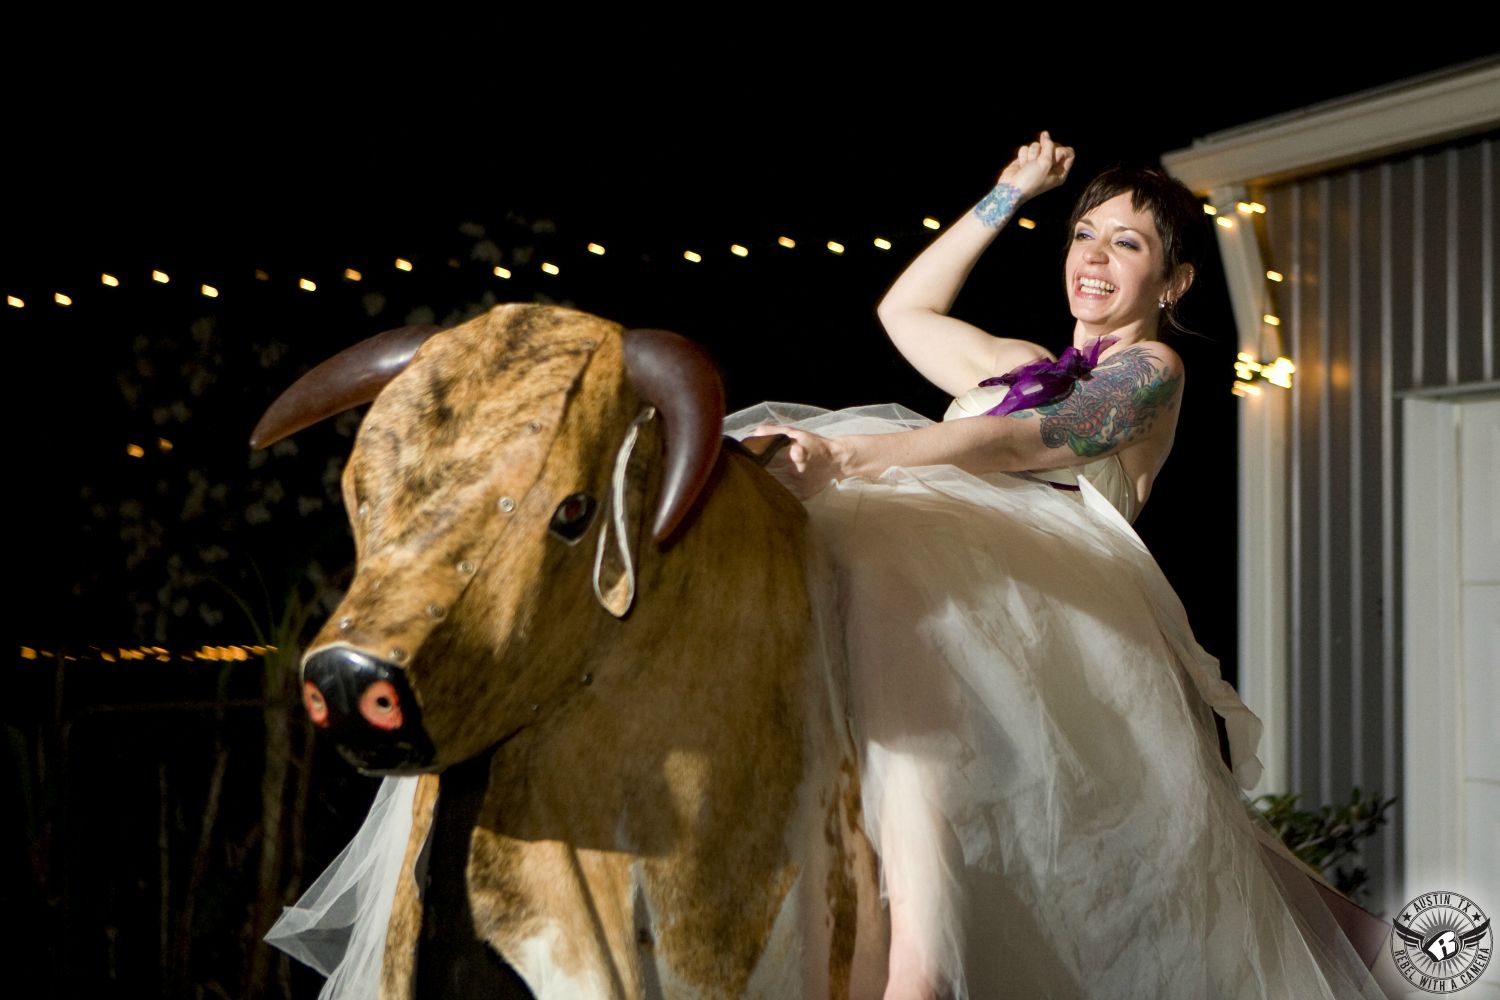 Wedding picture of a wild bride wearing a custom designed haute couture wedding dress riding on a mechanical bull at The Phoenix wedding venue in Columbus, Texas.